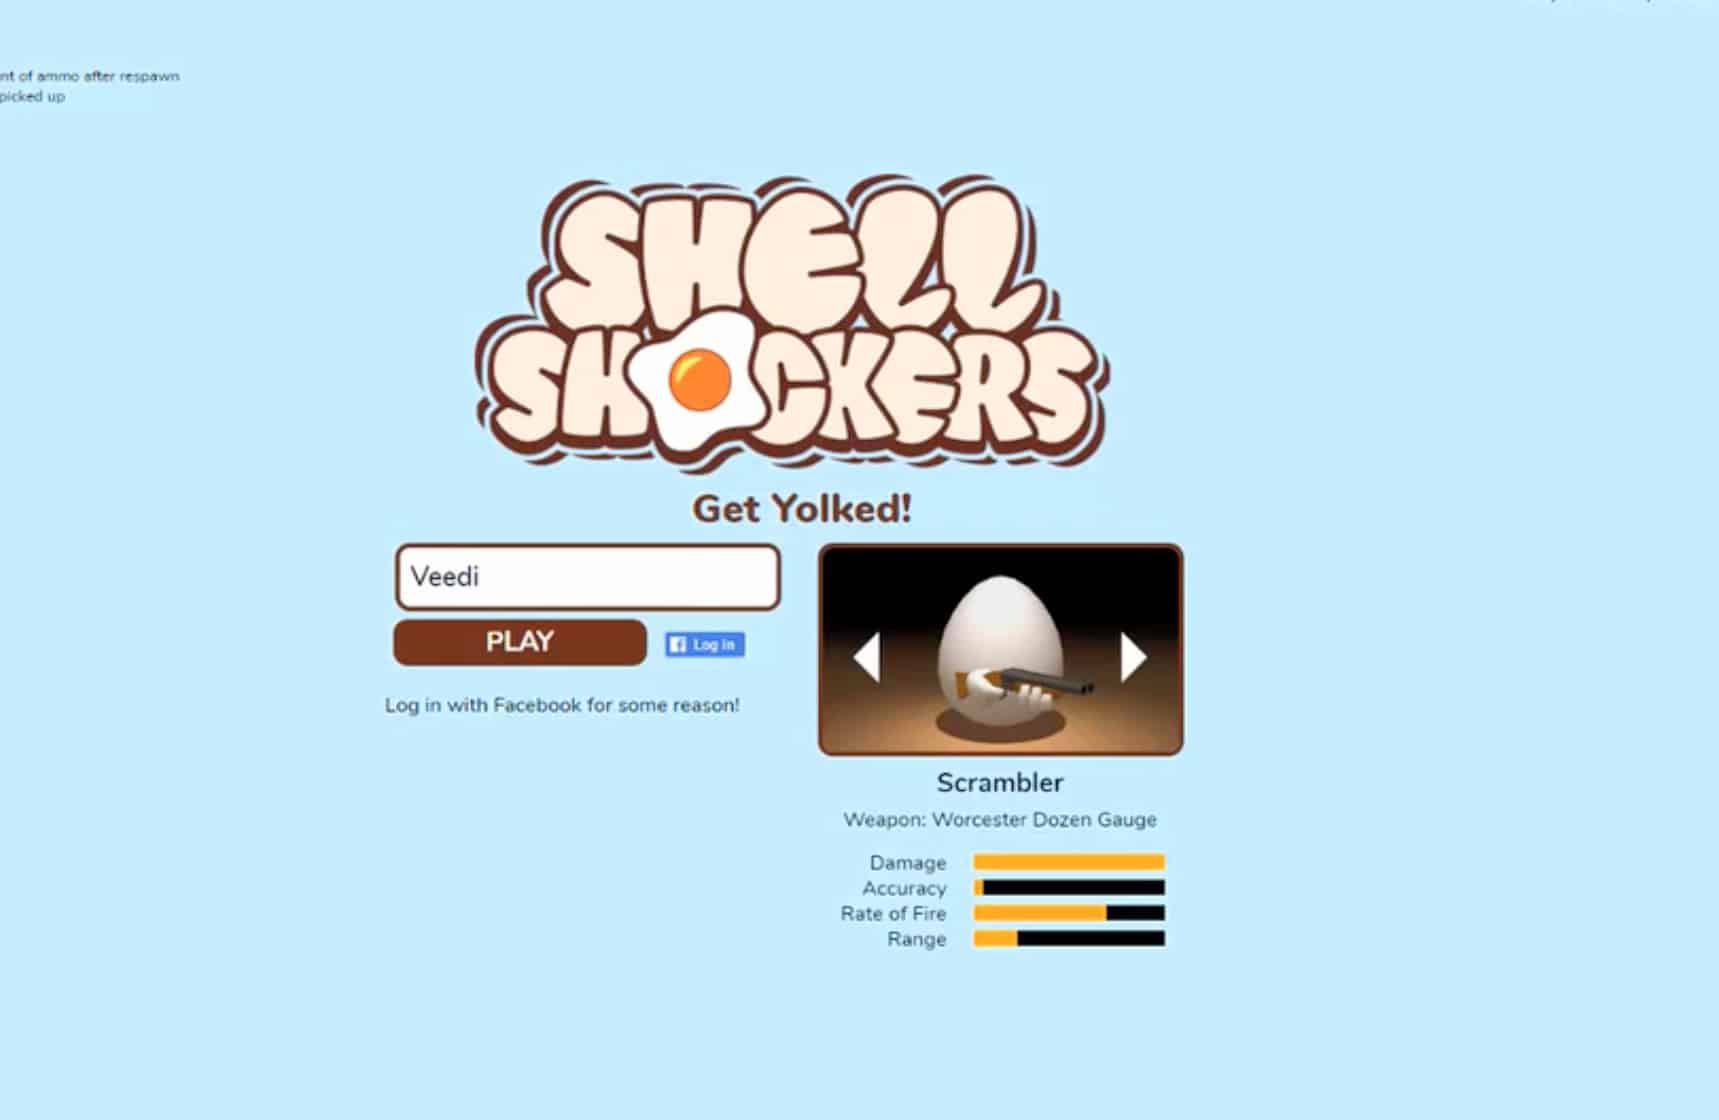 Cracking Codes in Shell Shockers?! + 2 Hidden Codes in the video